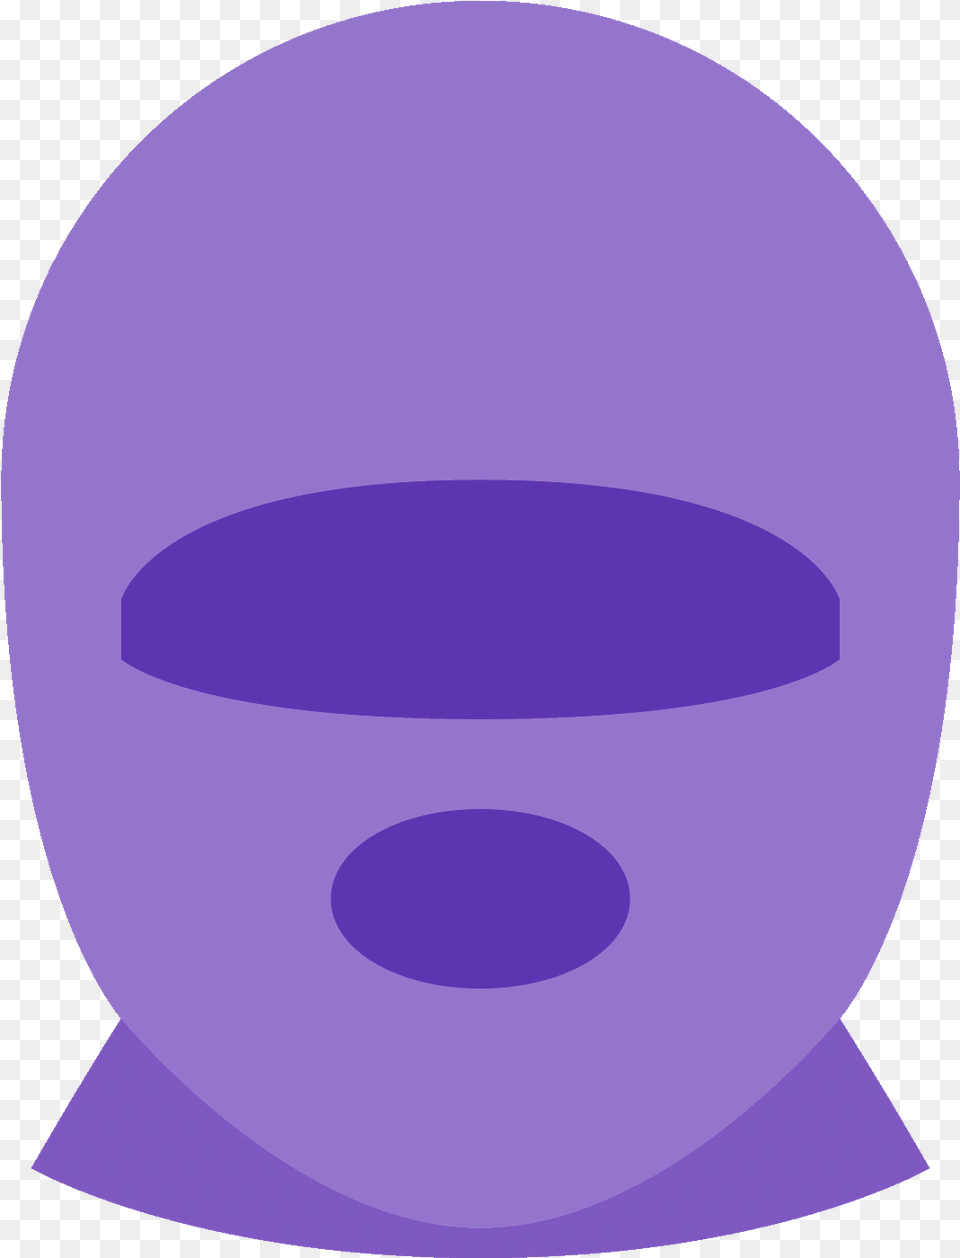 This Is An Icon Of A Ski Mask Decathlon Wed39ze Neoprene Powder Ski Mask, Sphere Free Transparent Png